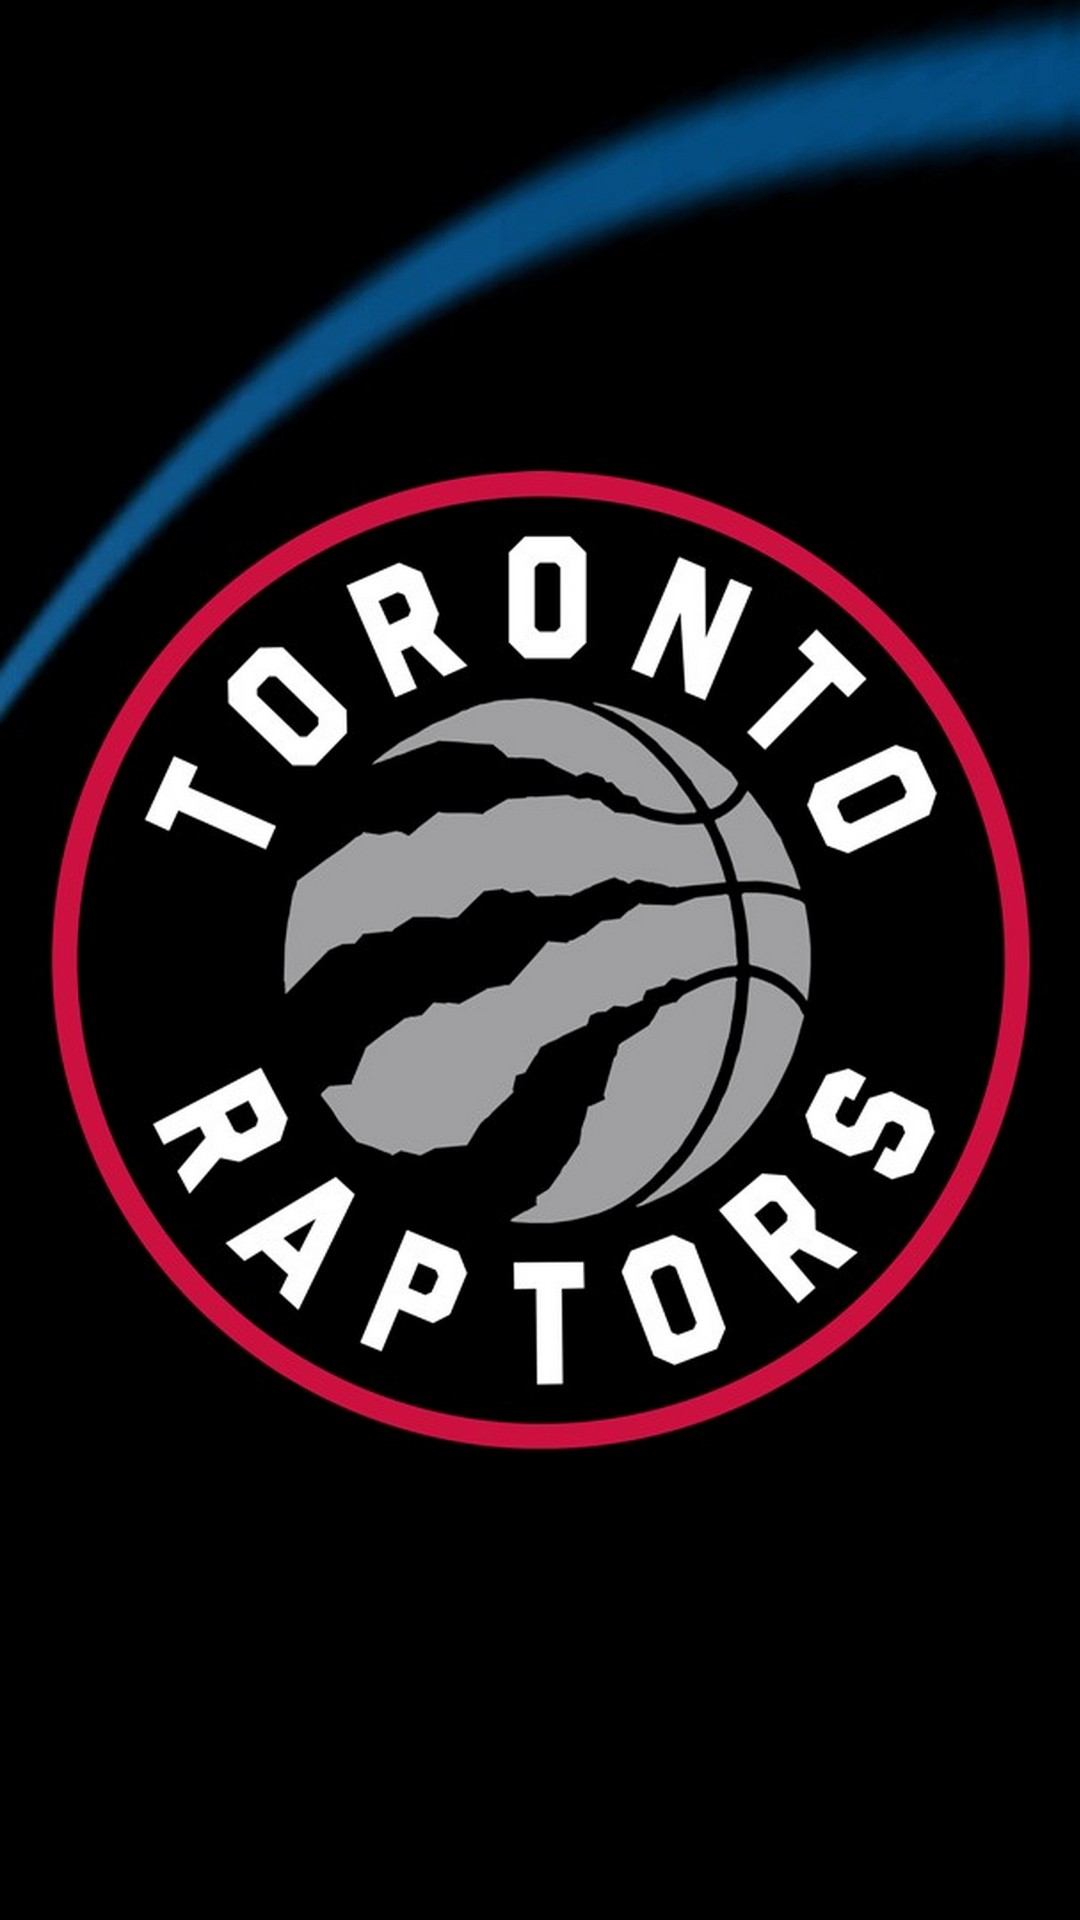 Toronto Raptors Wallpaper iPhone with resolution 1080X1920 pixel. You can make this wallpaper for your iPhone 5, 6, 7, 8, X backgrounds, Mobile Screensaver, or iPad Lock Screen